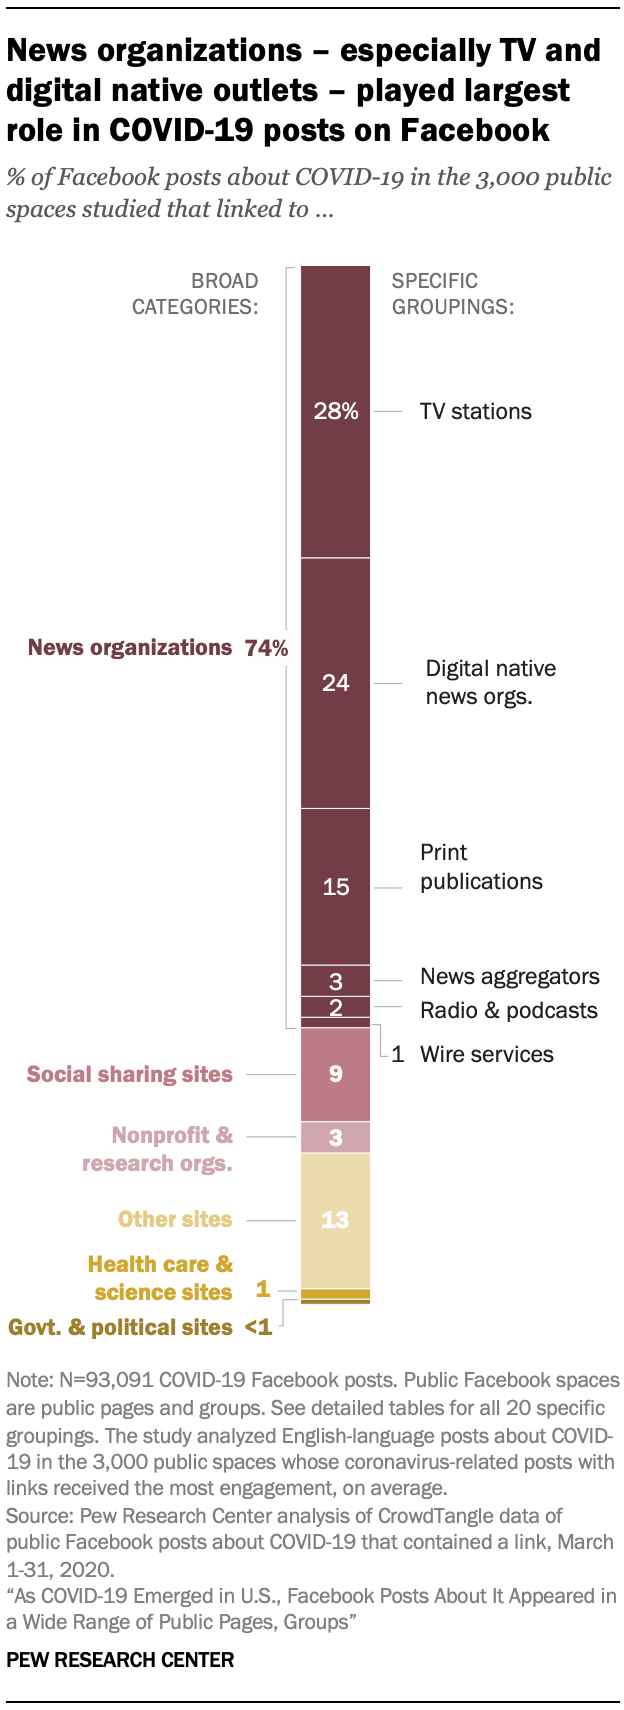 News organizations – especially TV and digital native outlets – played largest role in COVID-19 posts on Facebook 